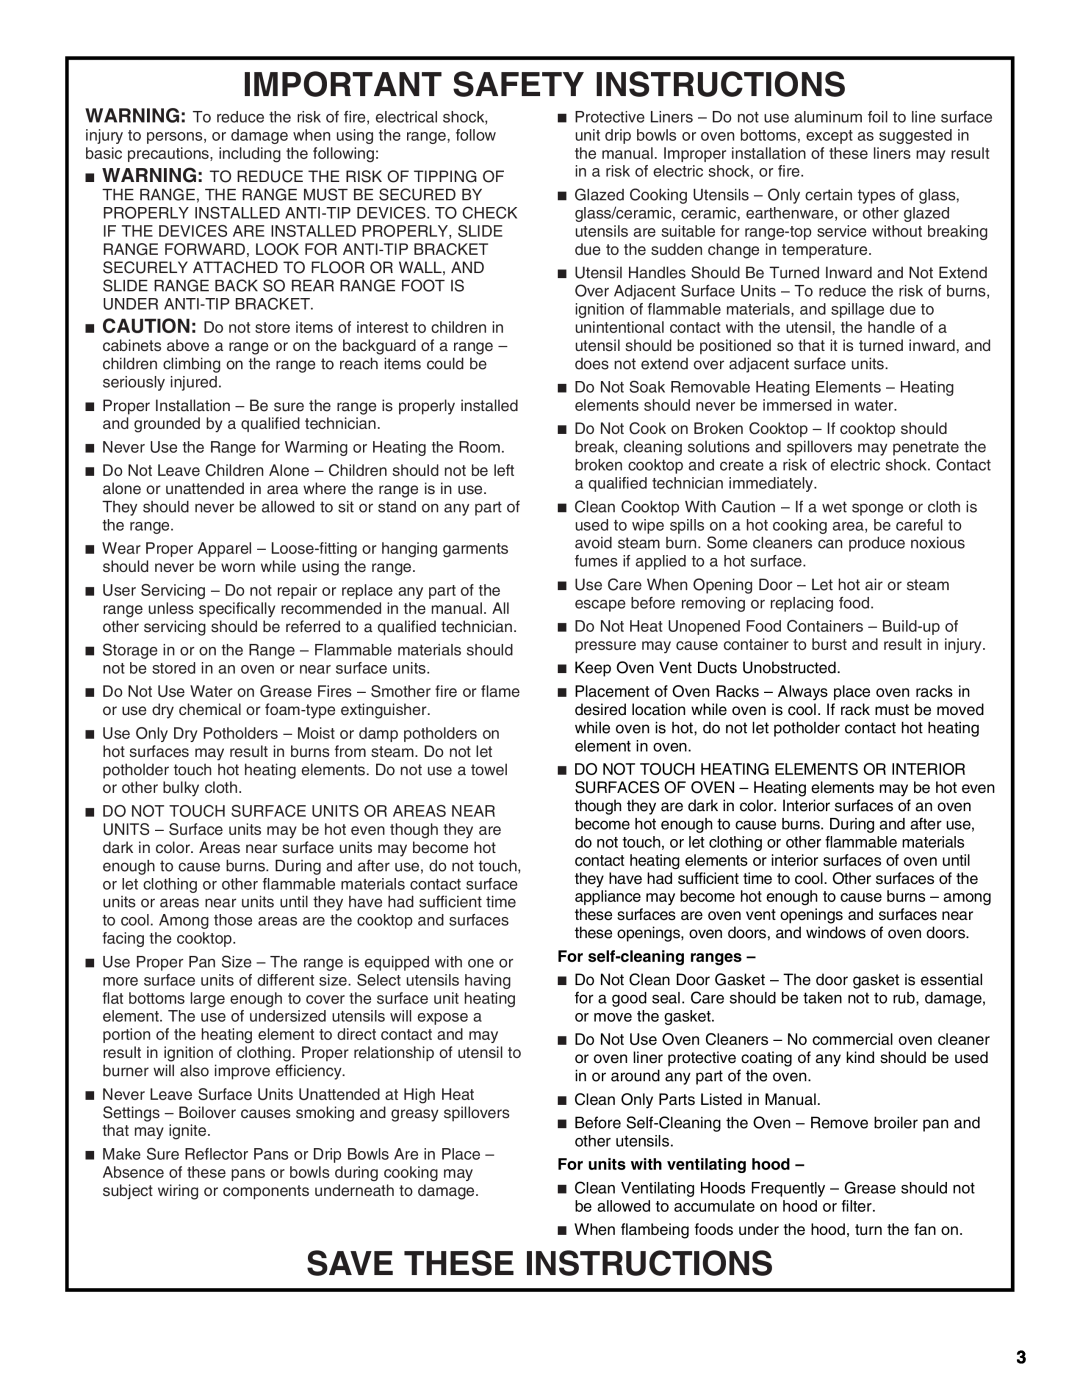 Whirlpool W10545225B warranty Important Safety Instructions, Save These Instructions, For self-cleaning ranges 